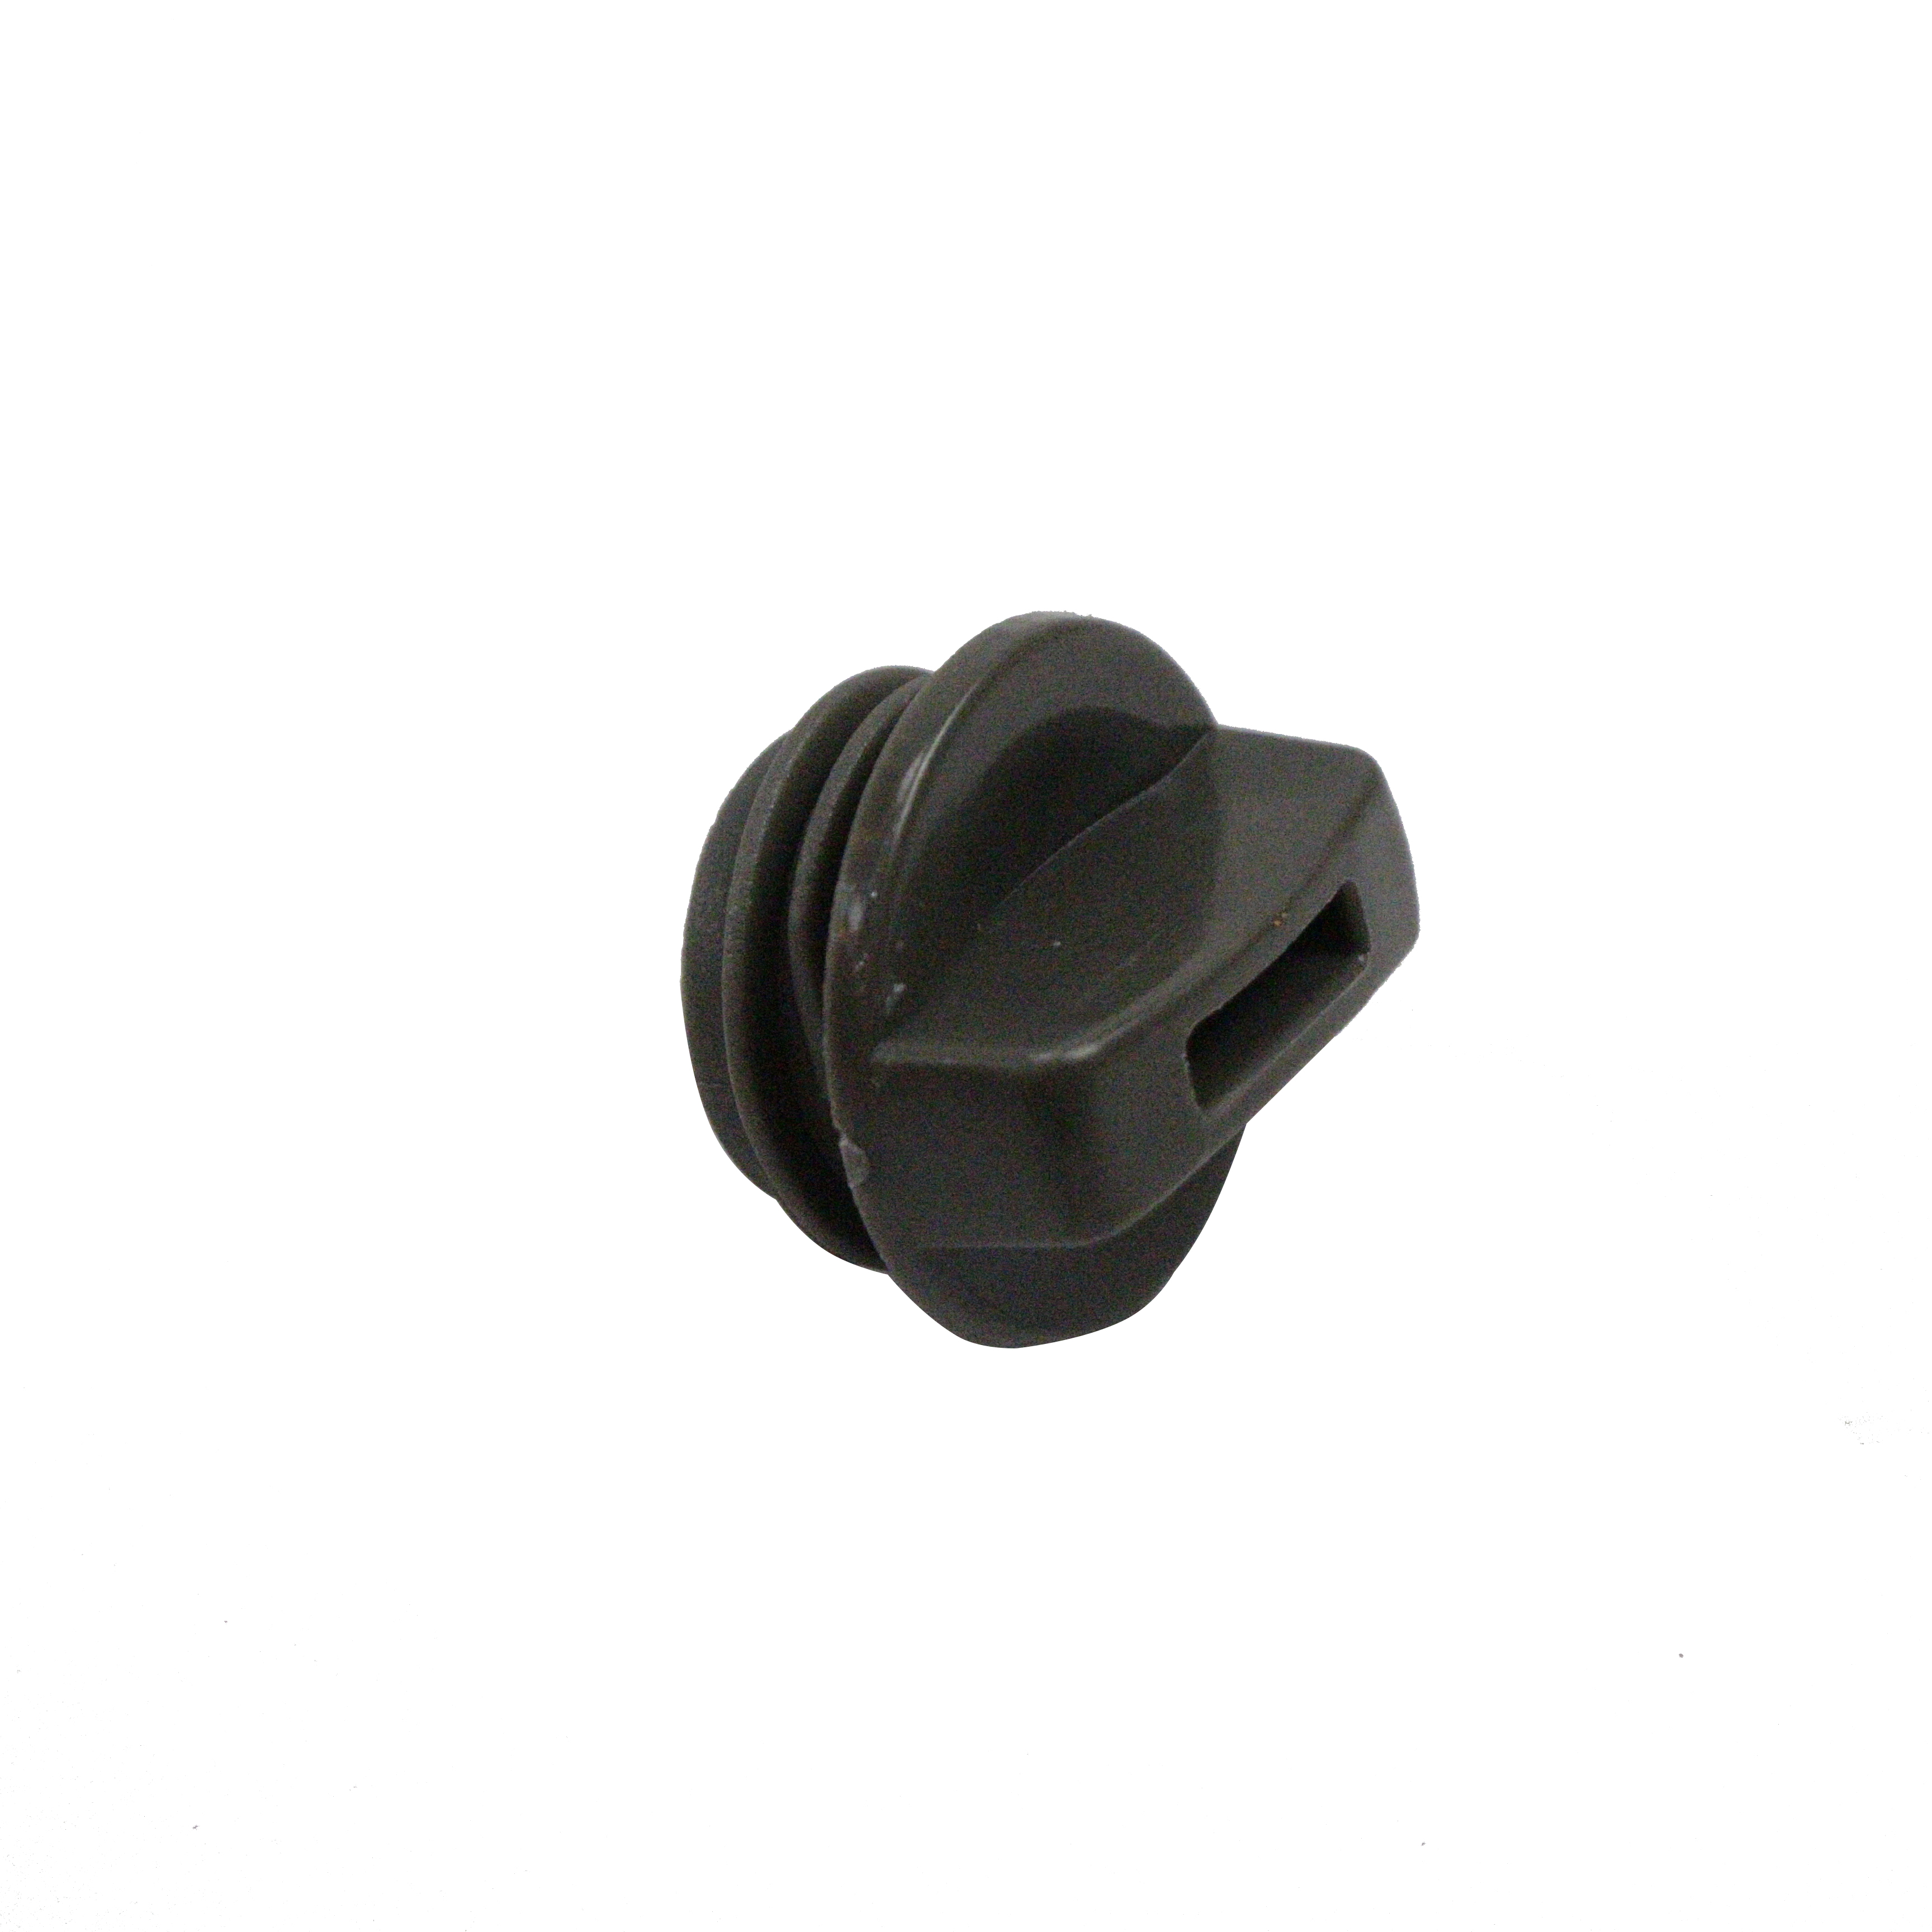 Oil Cap For Joncutter G3800 Chainsaw